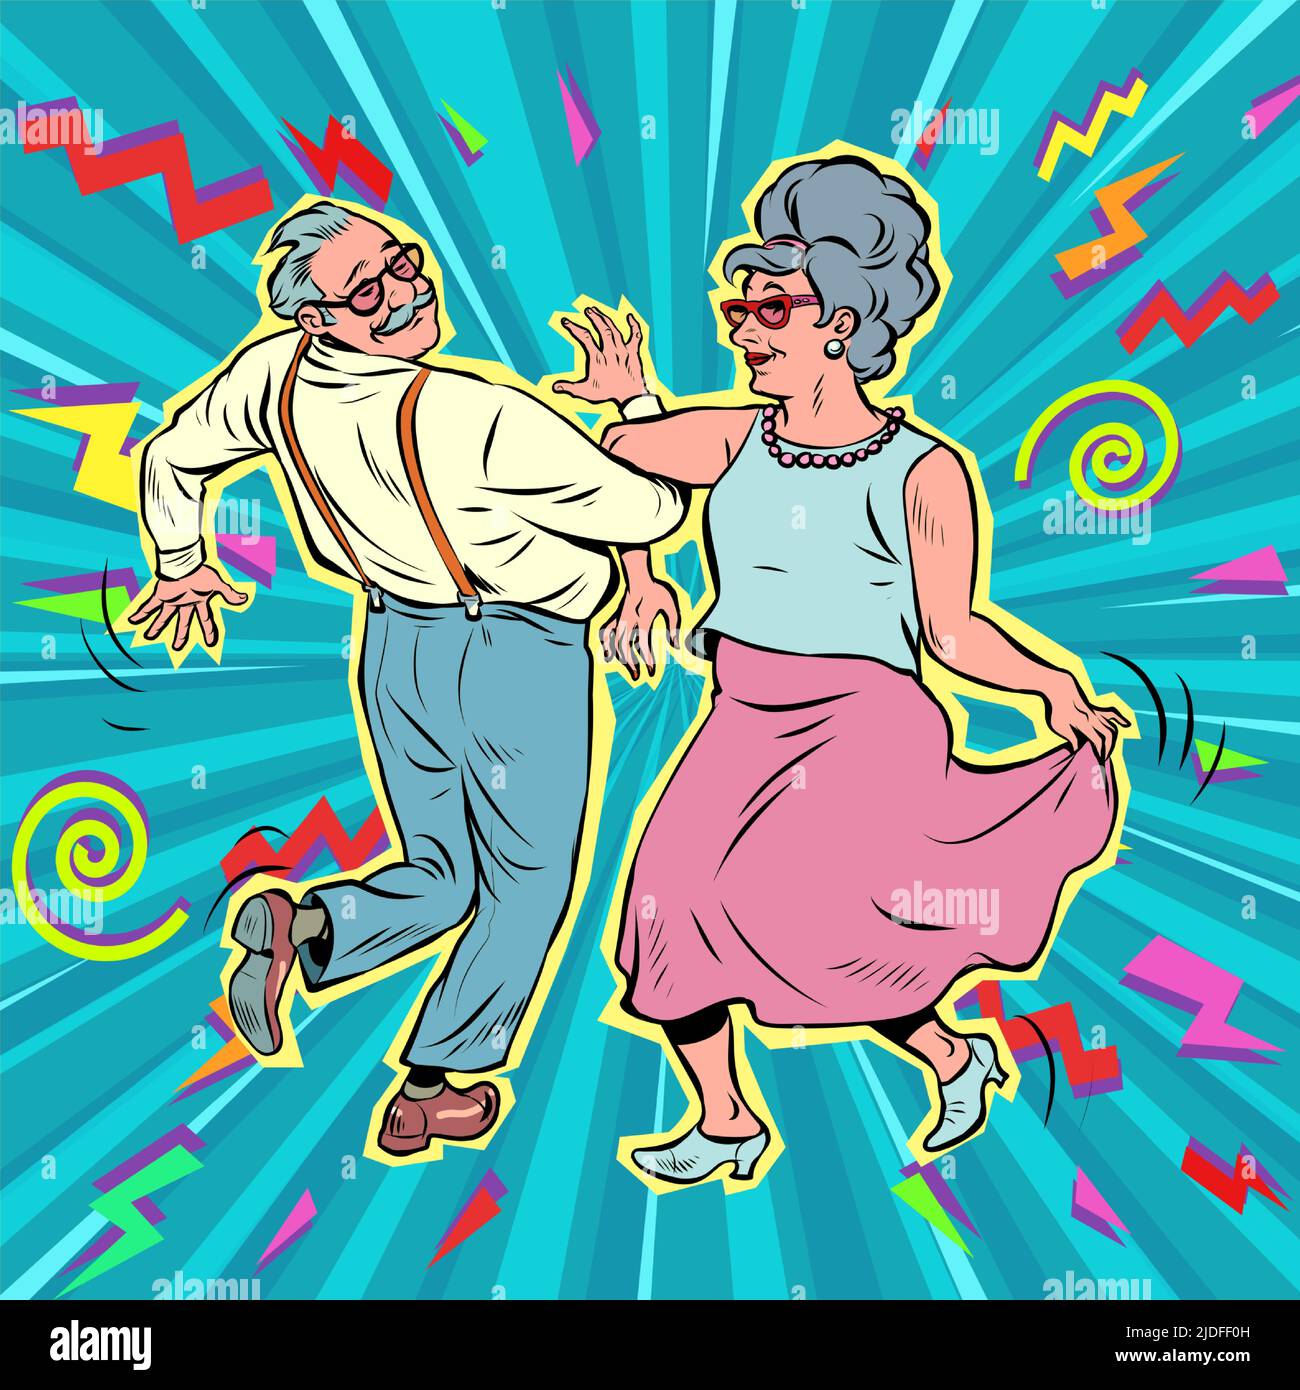 elderly couple old man and old lady dancing. pensioners rest. life style. music and art. Pop art retro vector illustration kitsch vintage 50s 60s styl Stock Vector